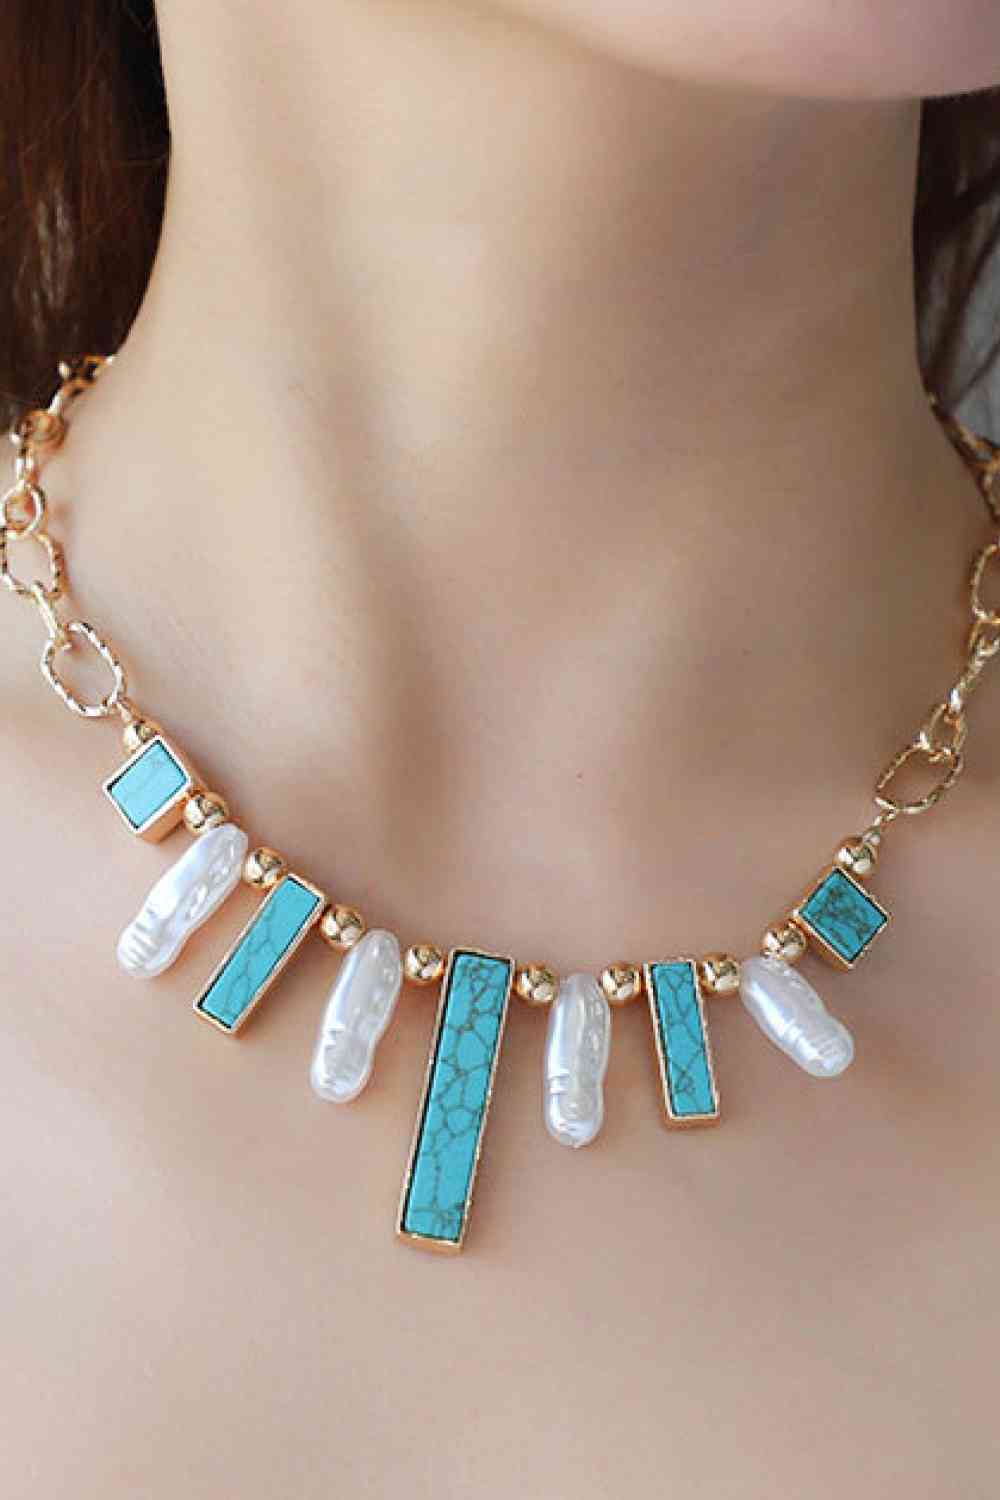 Turquoise Alloy Necklace BLUE ZONE PLANET